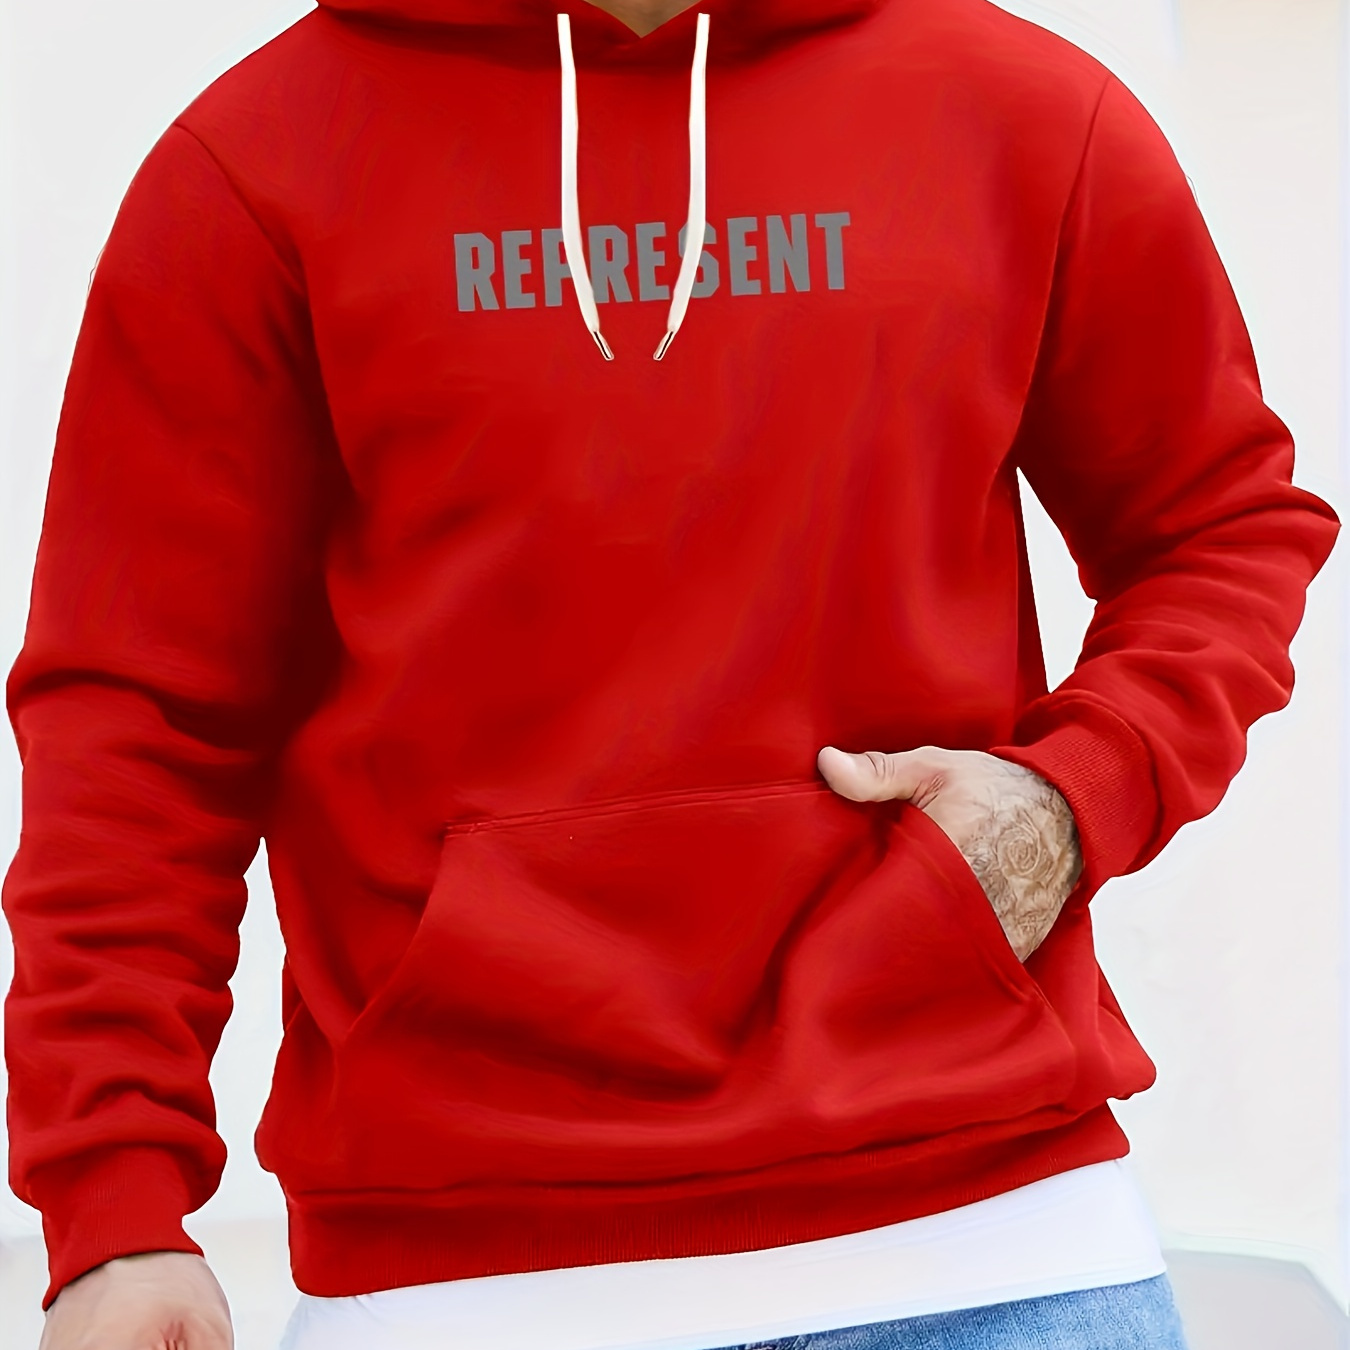 

Letter Print Hoodie, Cool Hoodies For Men, Men's Casual Graphic Design Pullover Hooded Sweatshirt Streetwear For Winter Fall, As Gifts